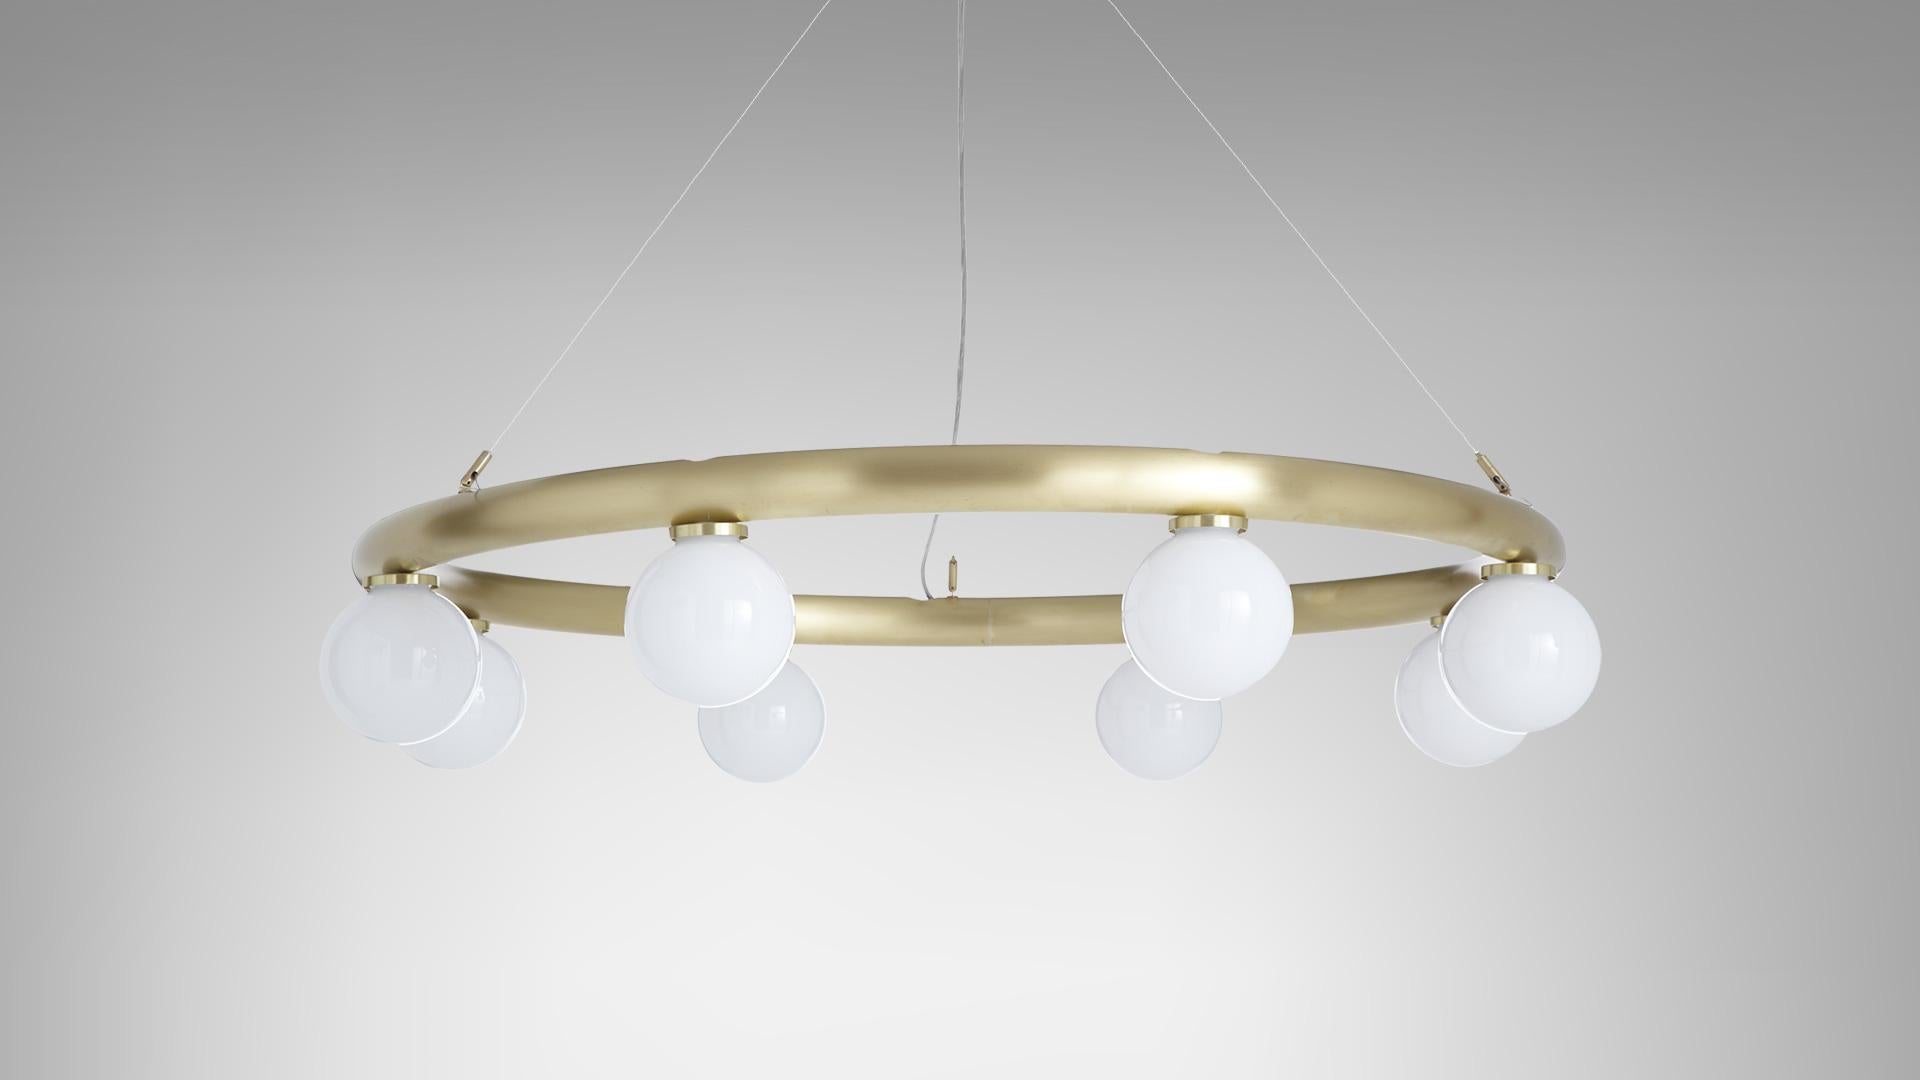 Orb pendant by CTO Lighting
Materials: Satin brass, opal glass shades, stainless steel suspension wire/clear flex
Dimensions: W 120 x D 120 x H 20 cm 

8 x G9, 25w max halogen (or 2.3w LED 2700k)
weight 11kg (24.3lbs)
supplied with 2000mm